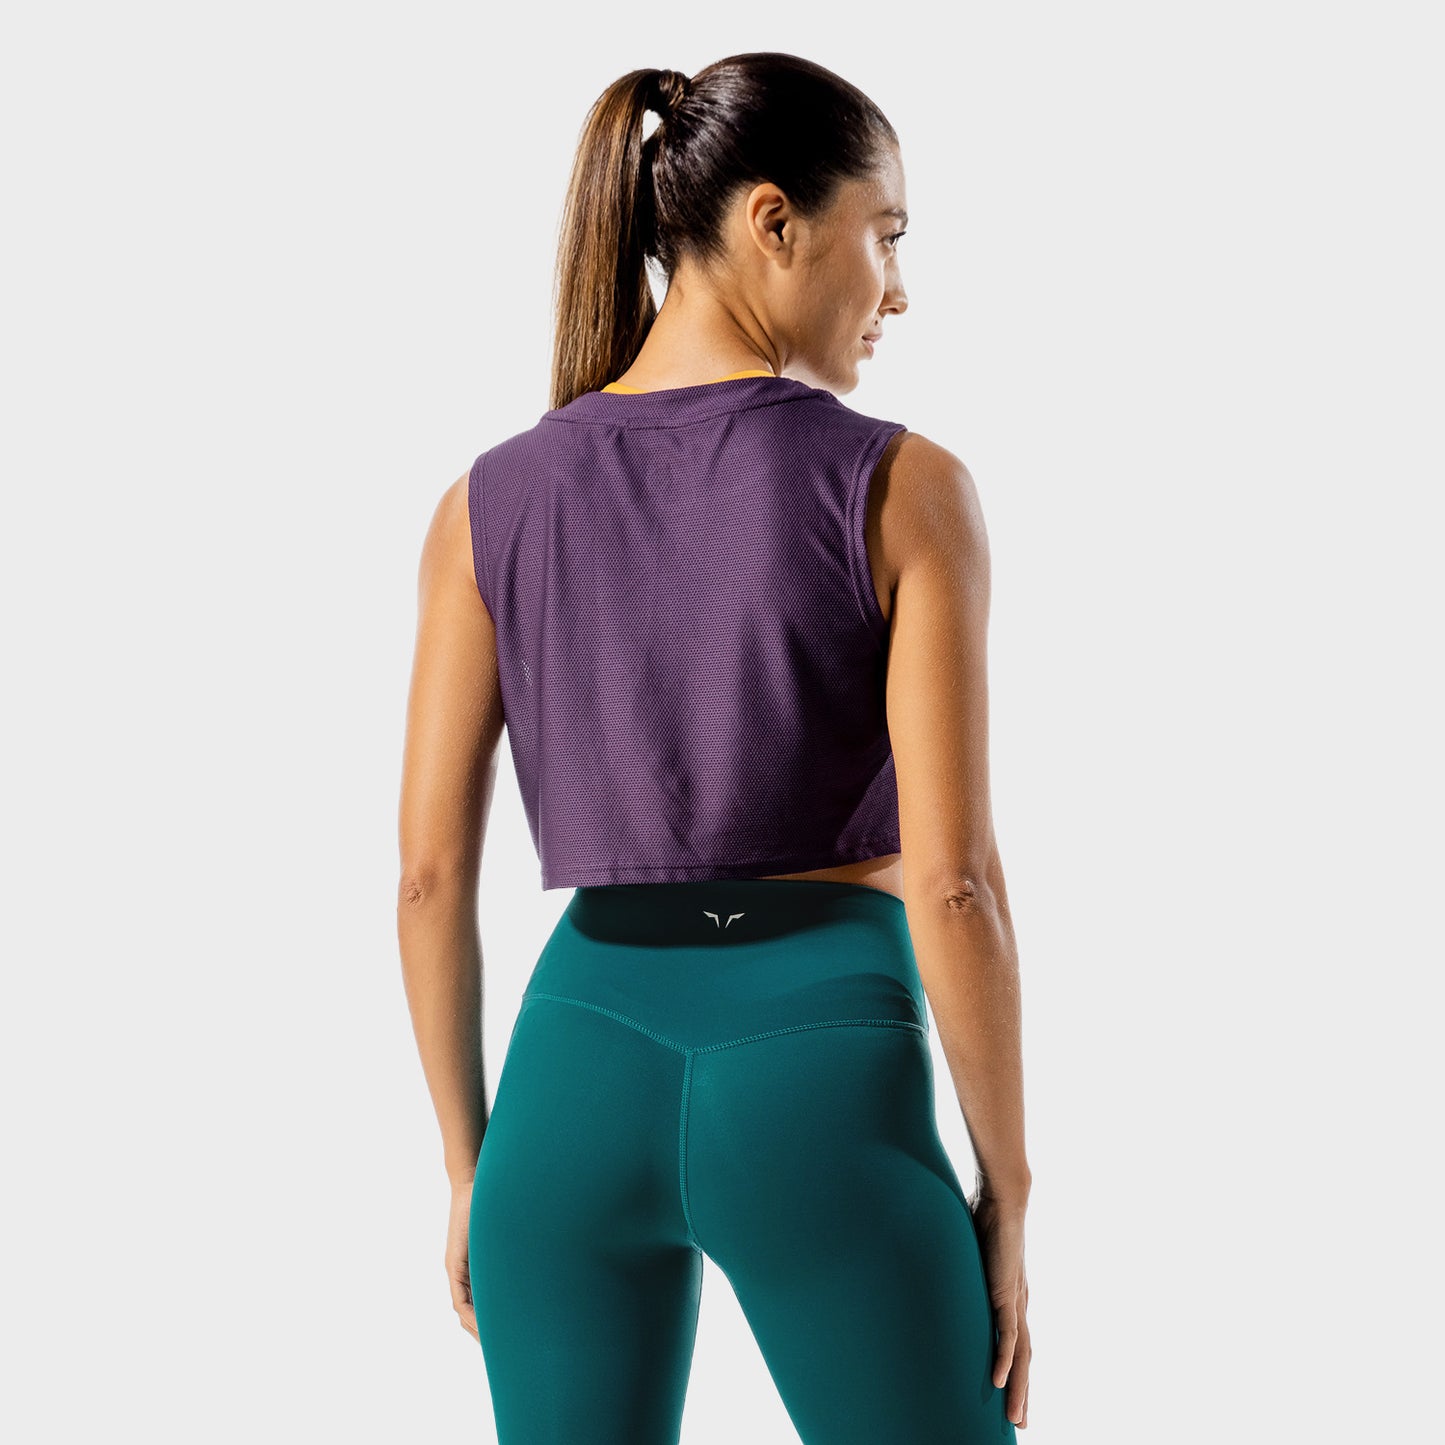 squatwolf-gym-t-shirts-for-women-limitless-crop-top-purple-workout-clothes